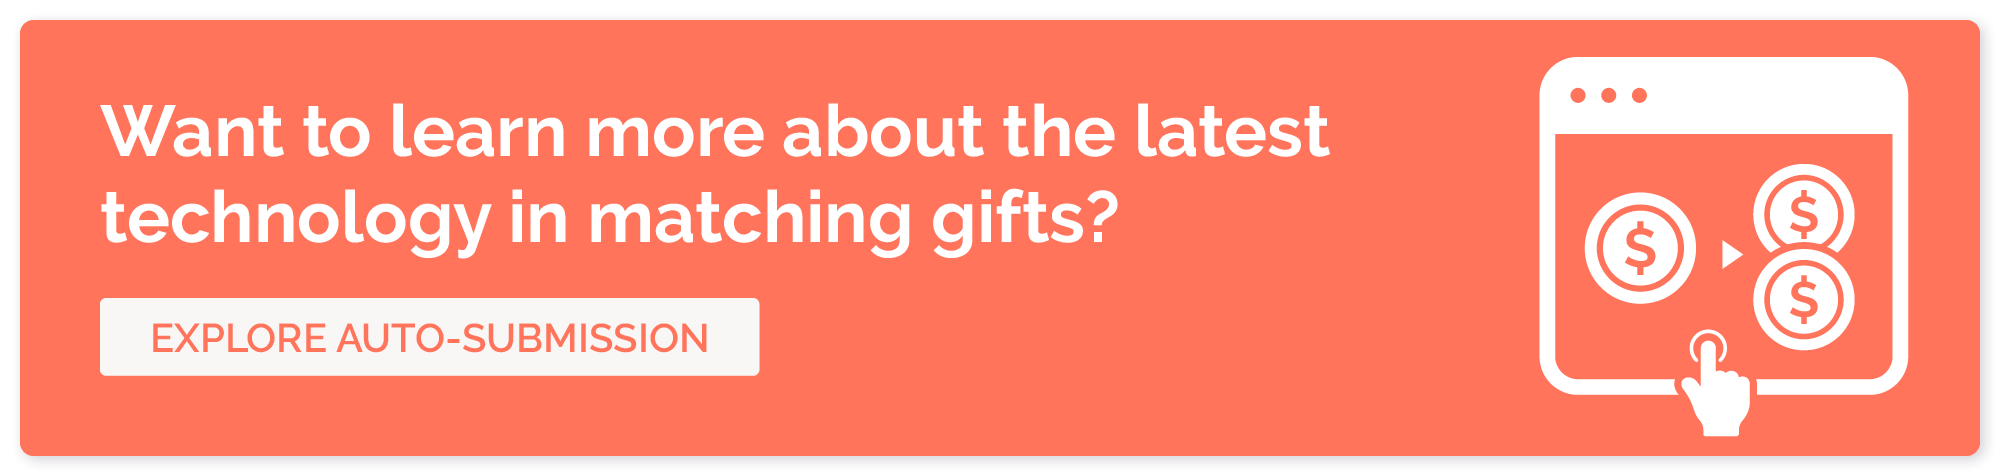 Want to learn more about the latest technology in matching gifts? Download our matching gifts guide.